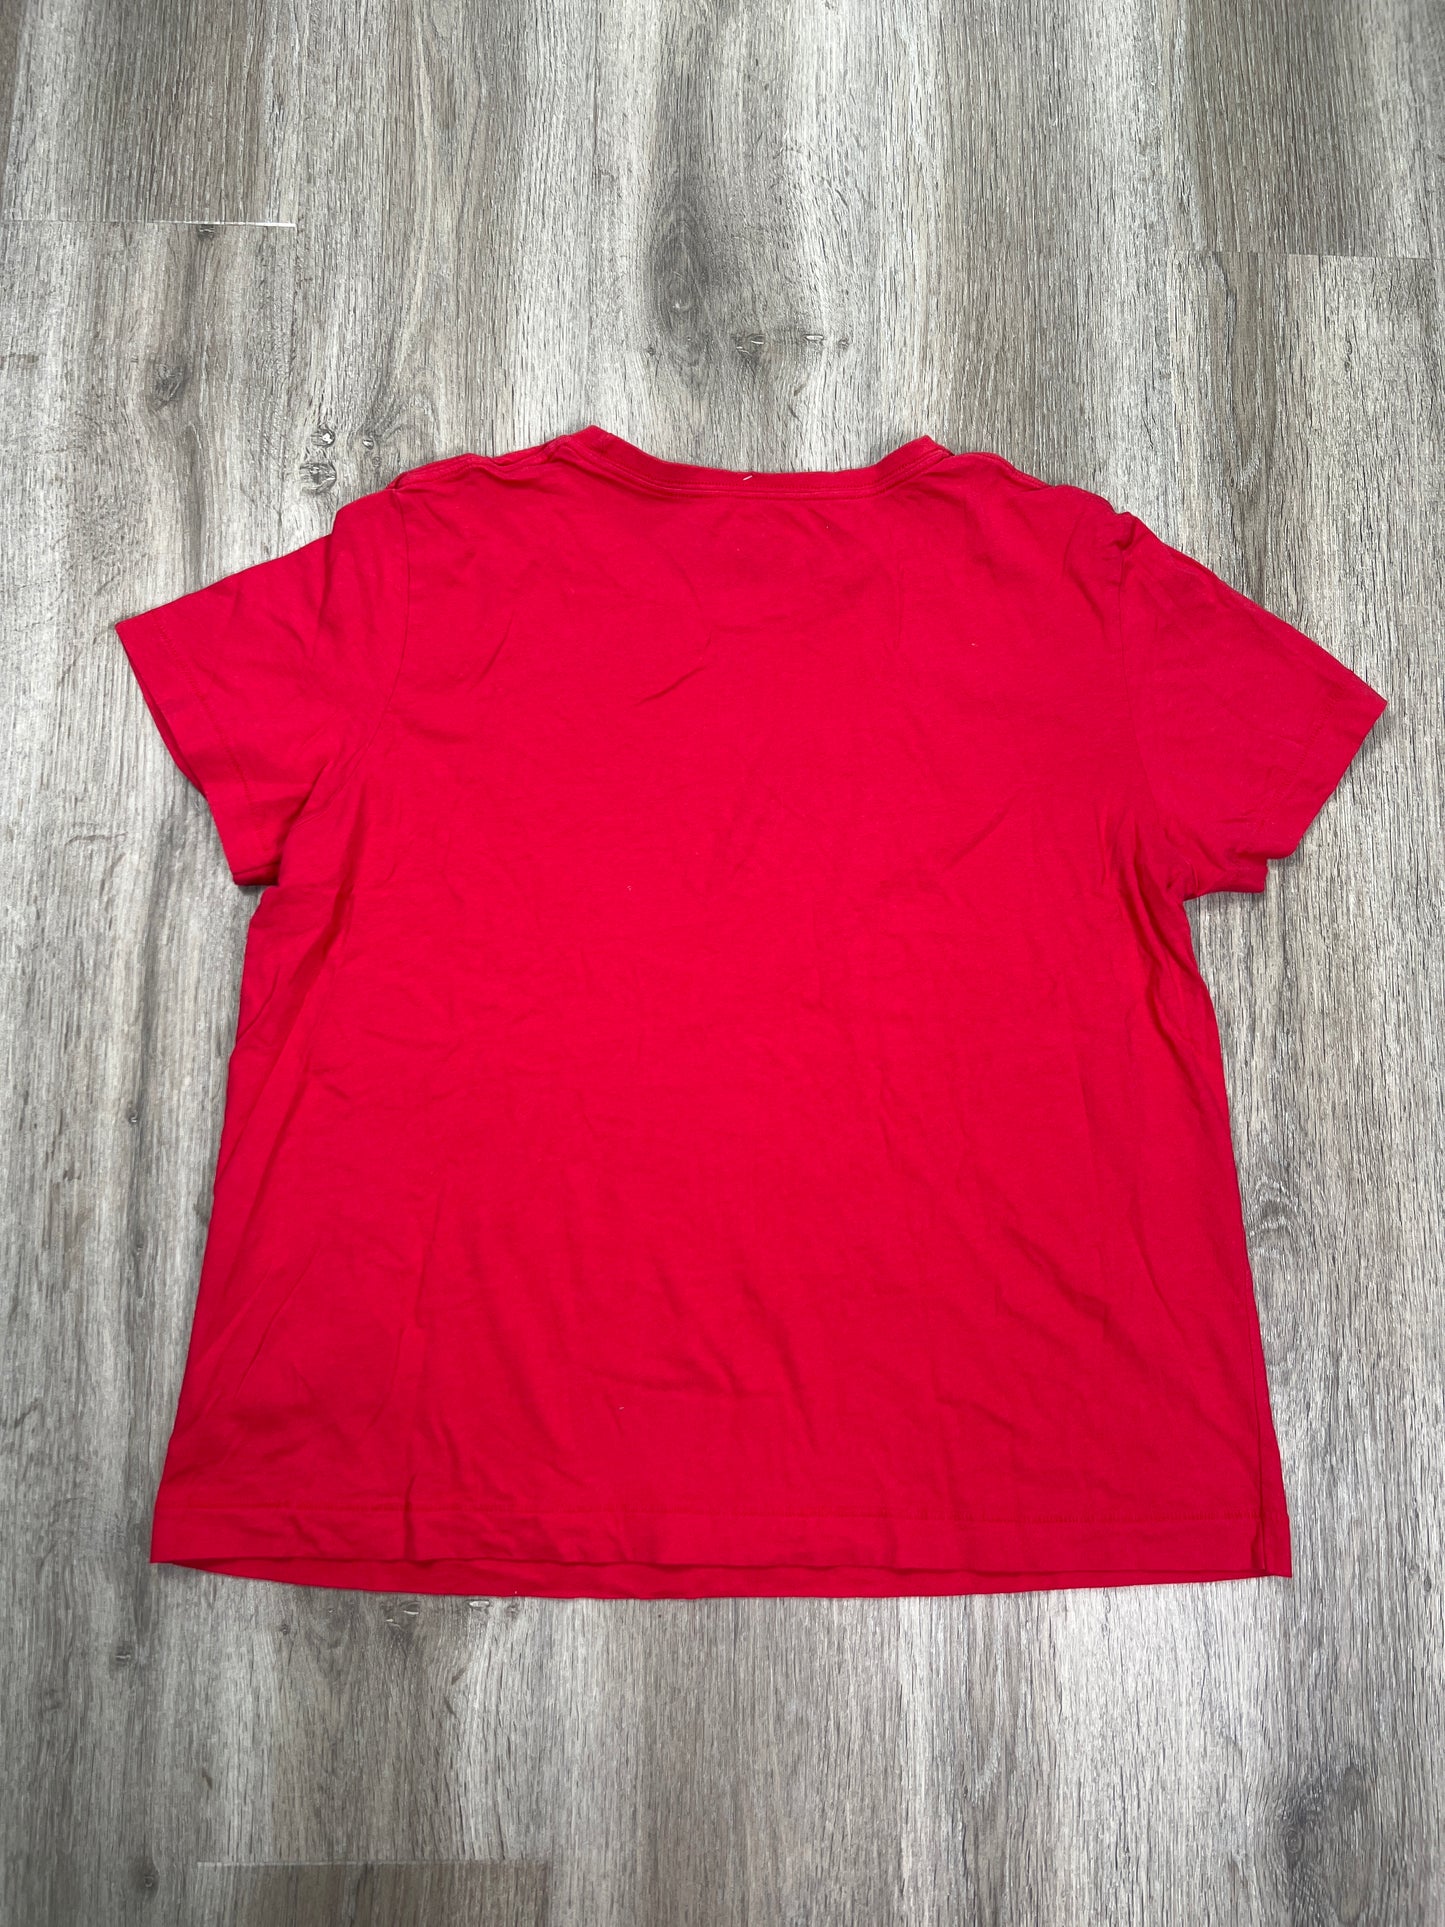 Top Short Sleeve Basic By Champion  Size: 2x